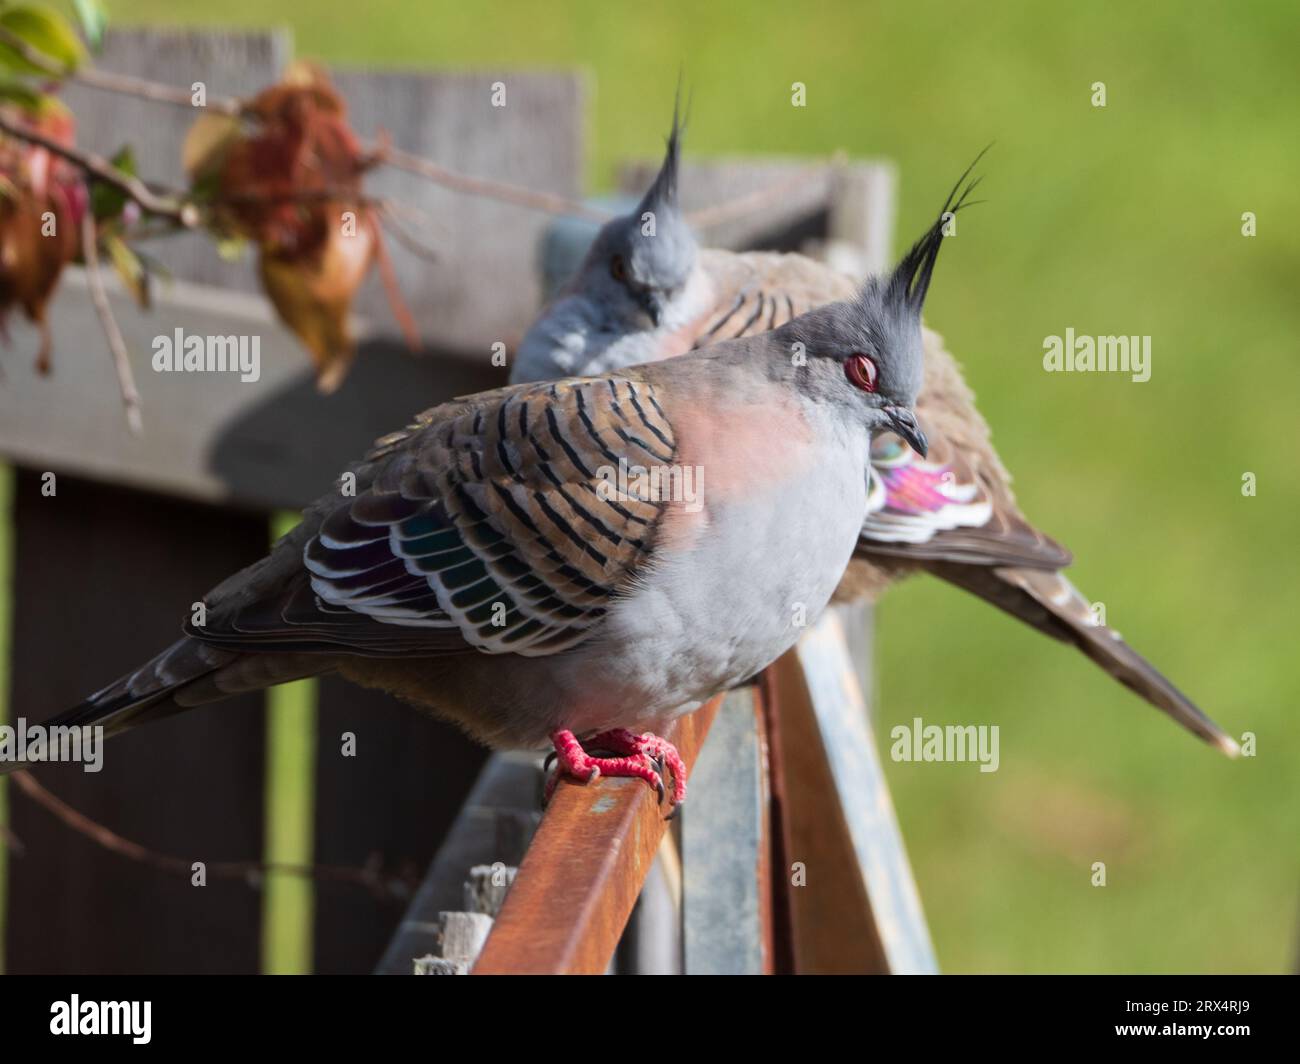 Crested or Top Knot Pigeons on a fence, one with eyes closed Stock Photo